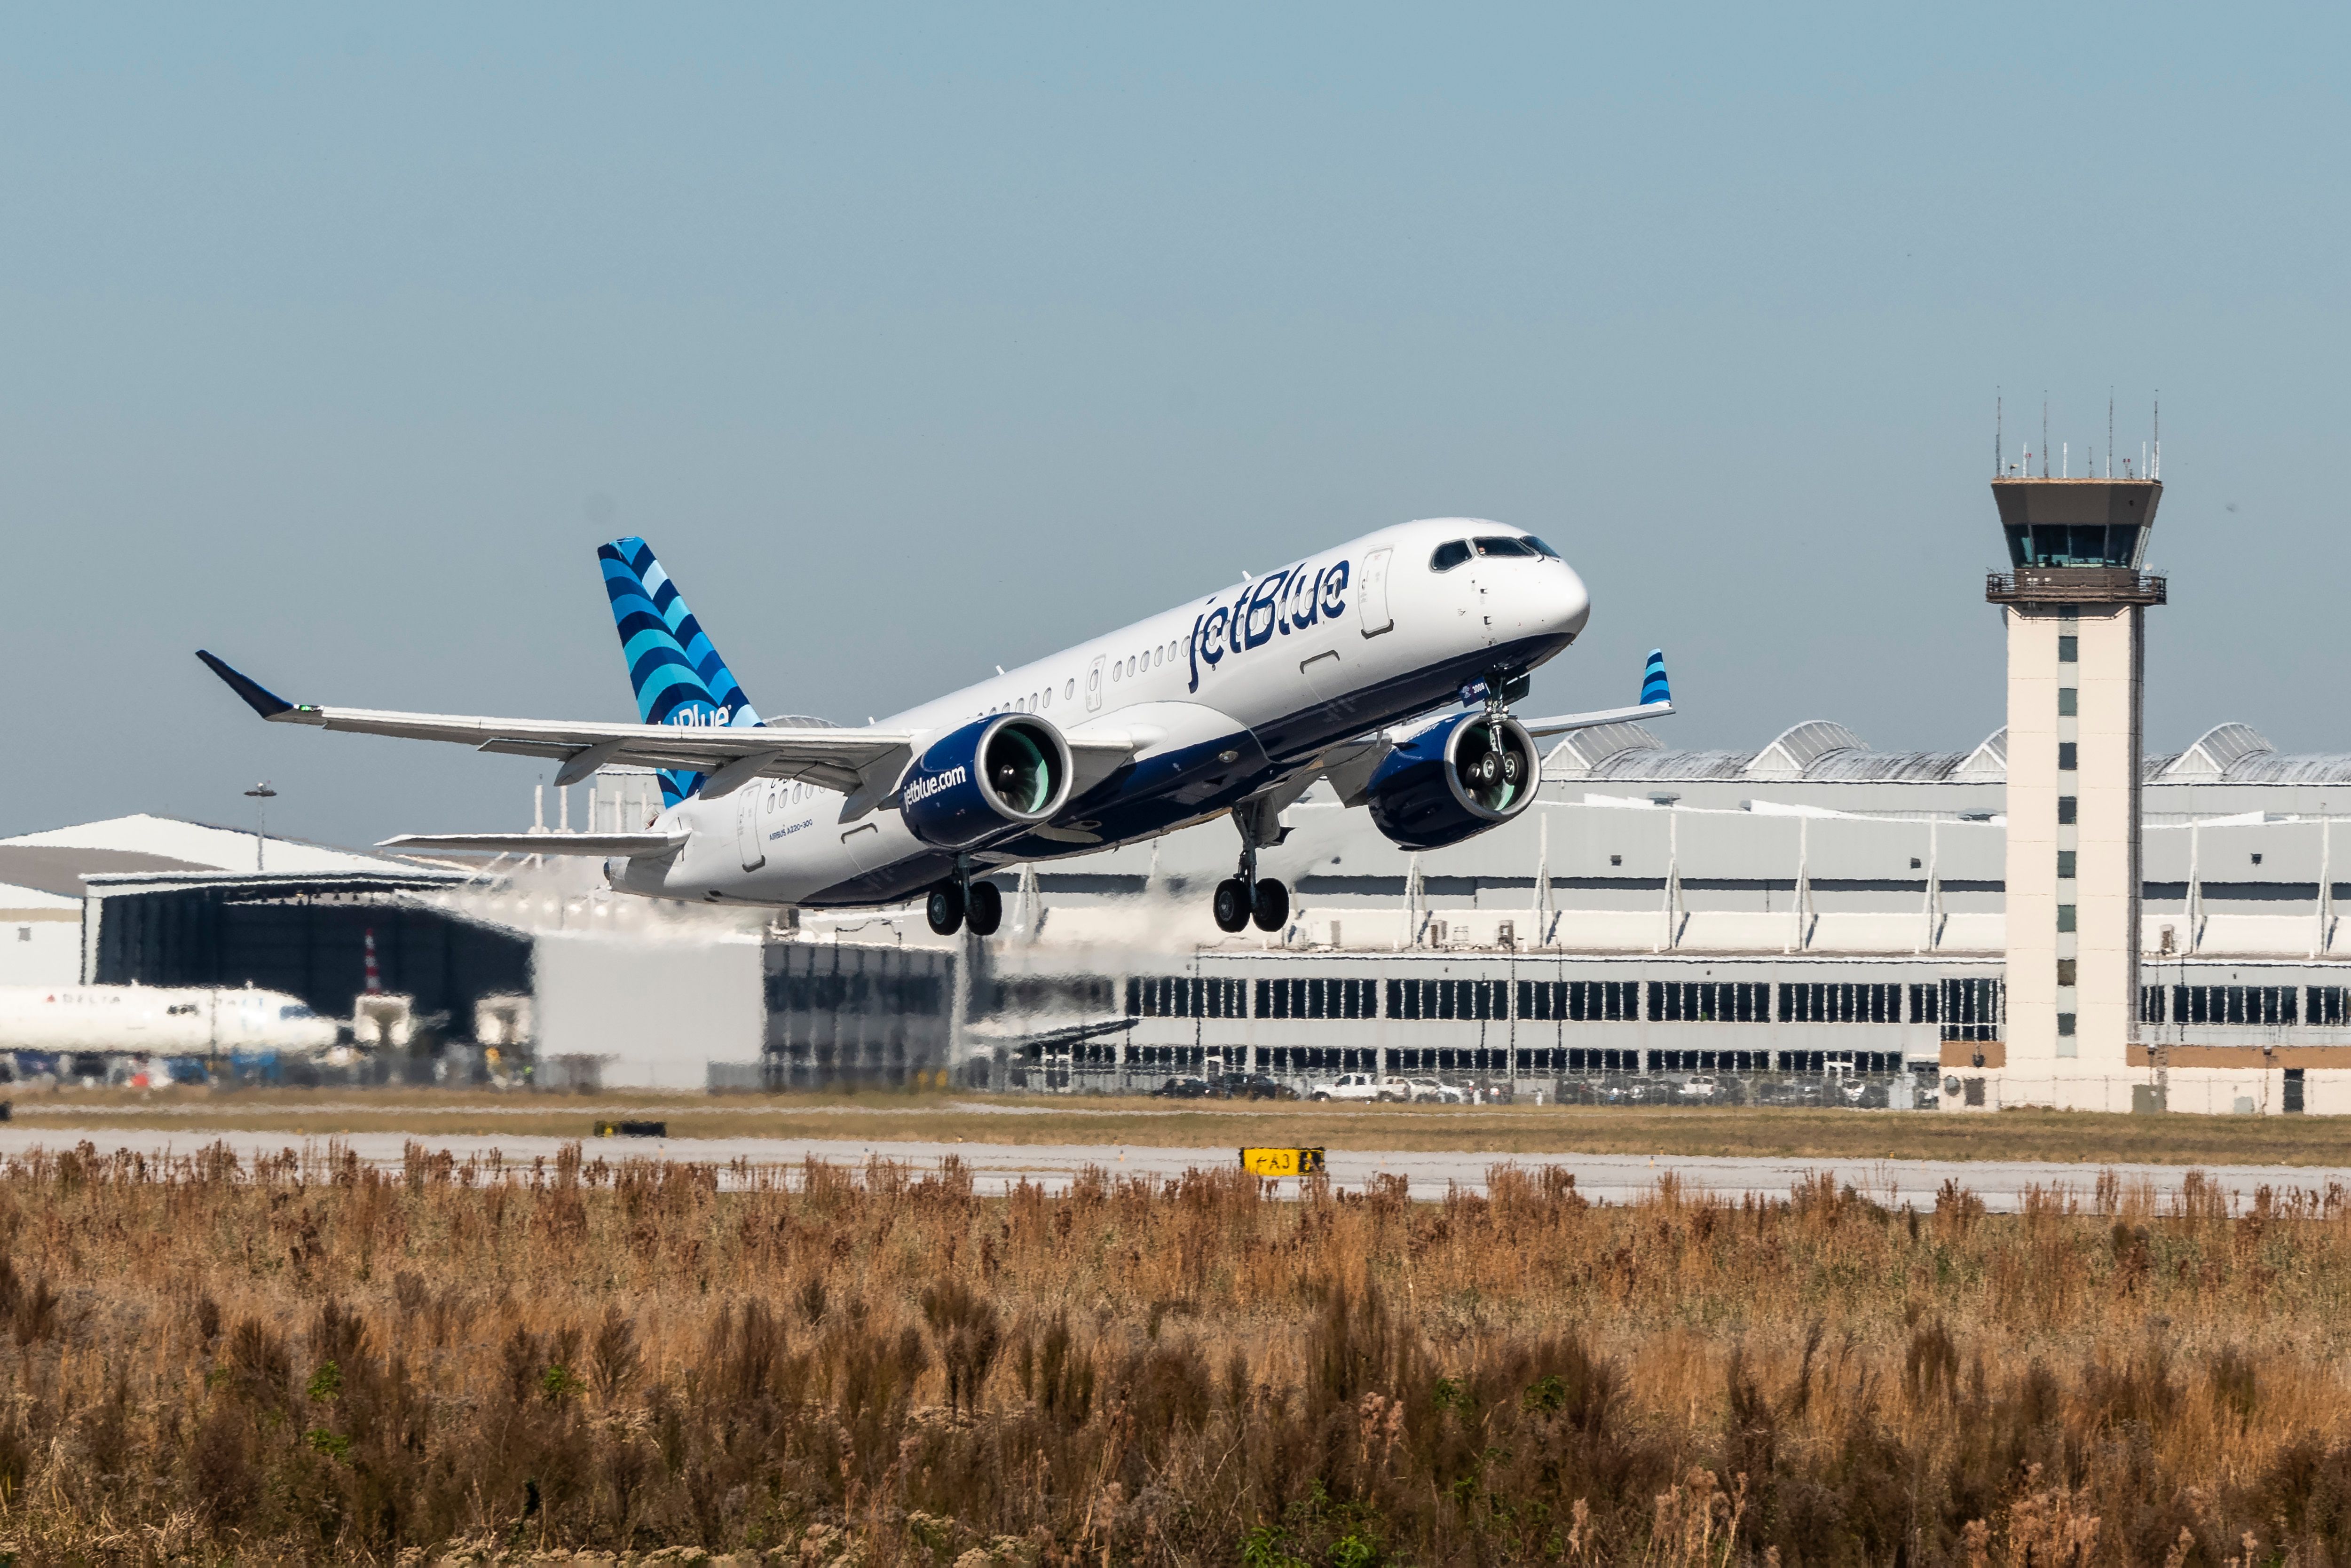 A220-300 JetBlue taking off